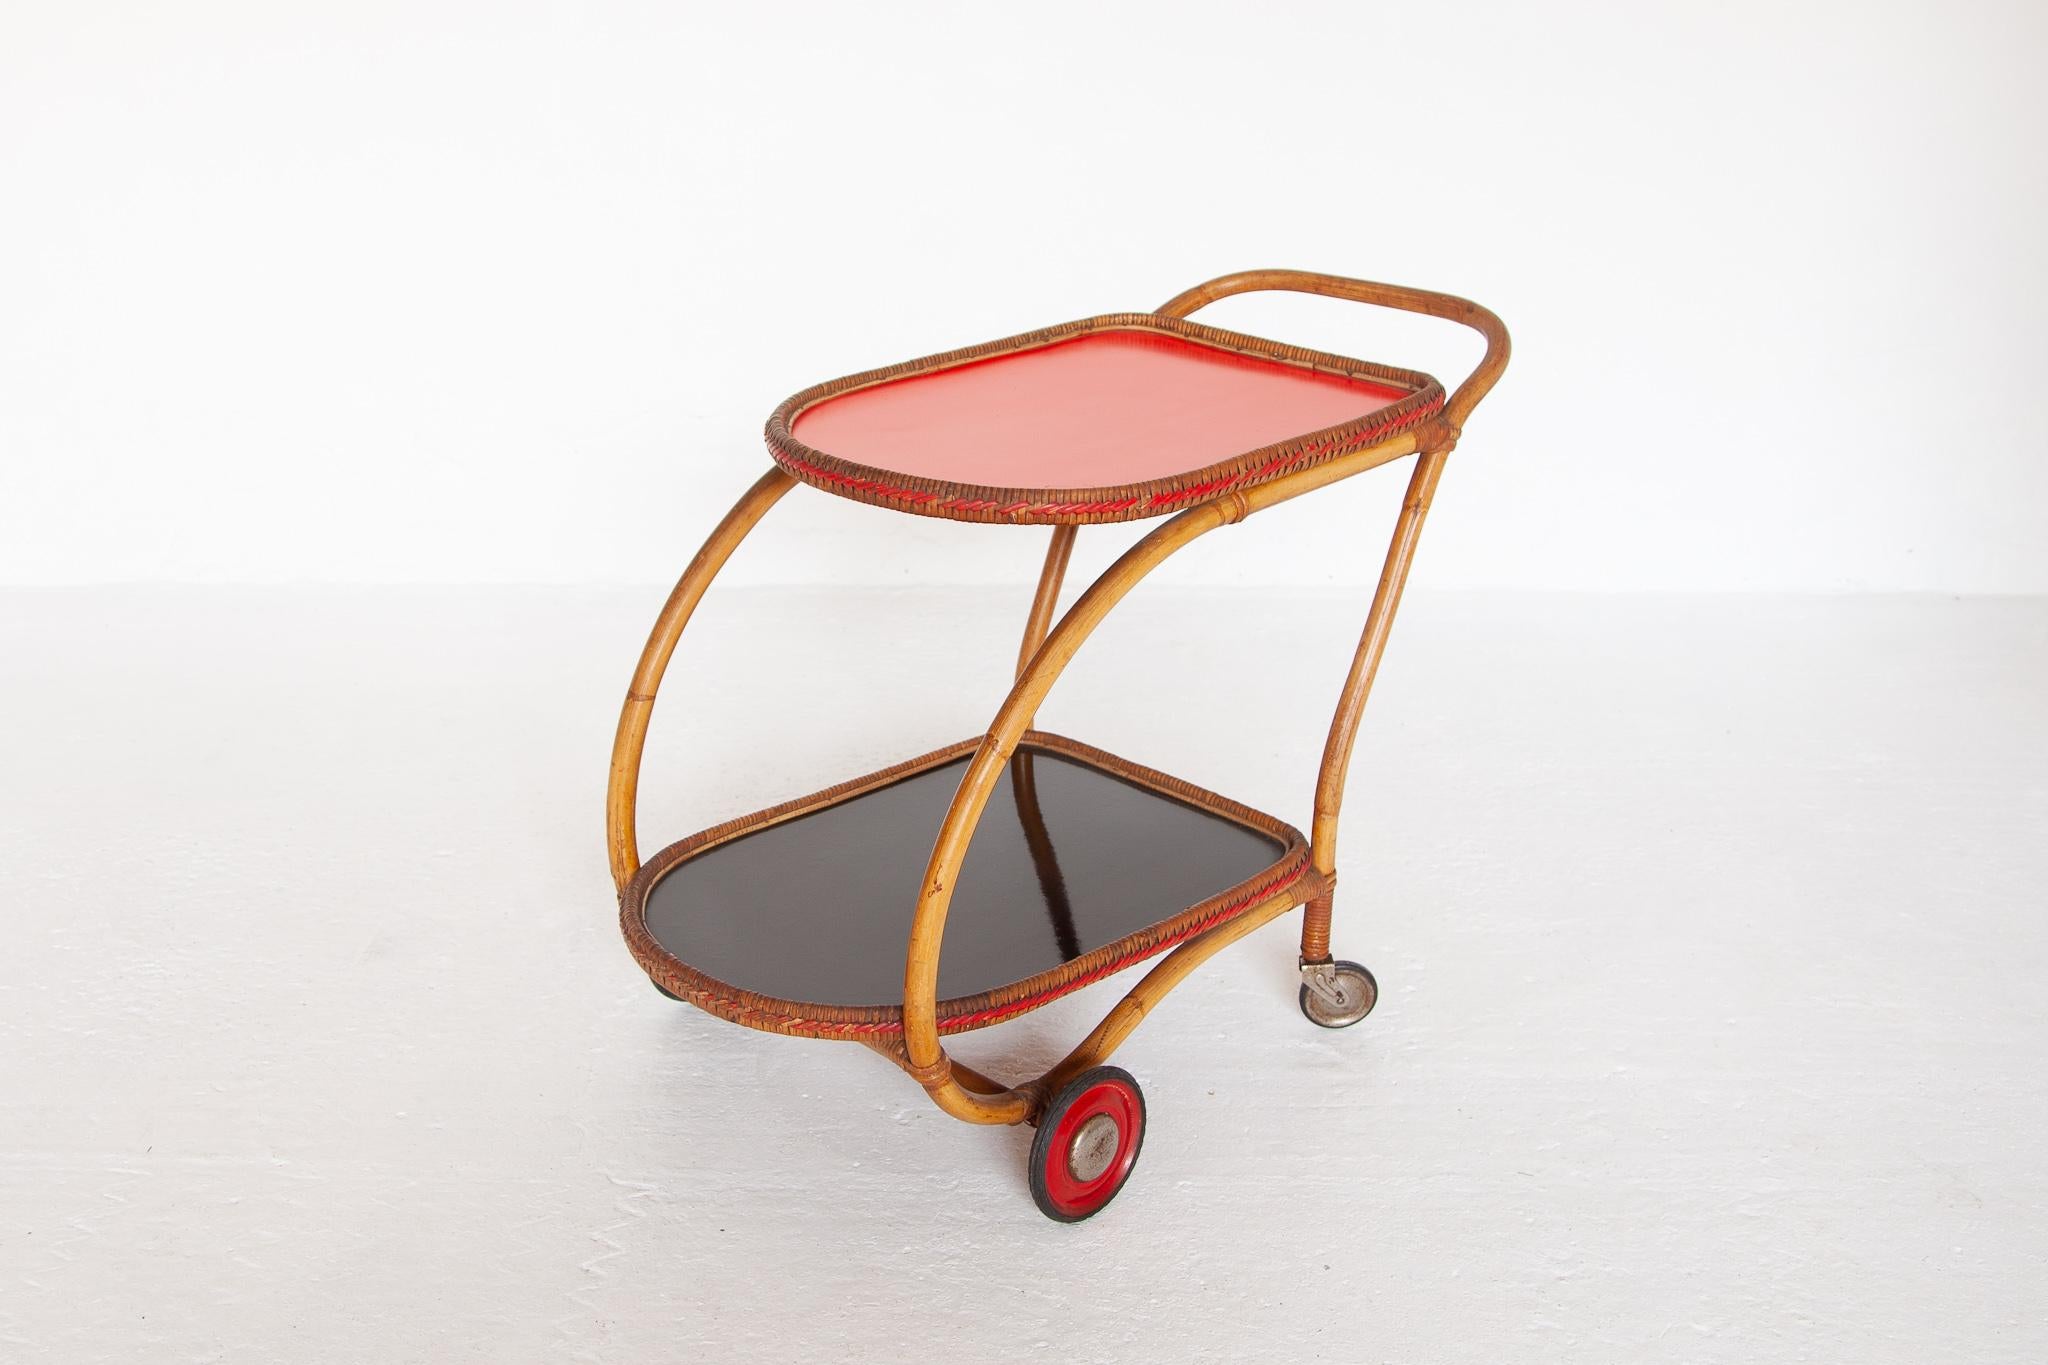 Mid-20th Century Bamboo Mid-Century Modern Bar Cart with a Red Touch, Italy, 1950s